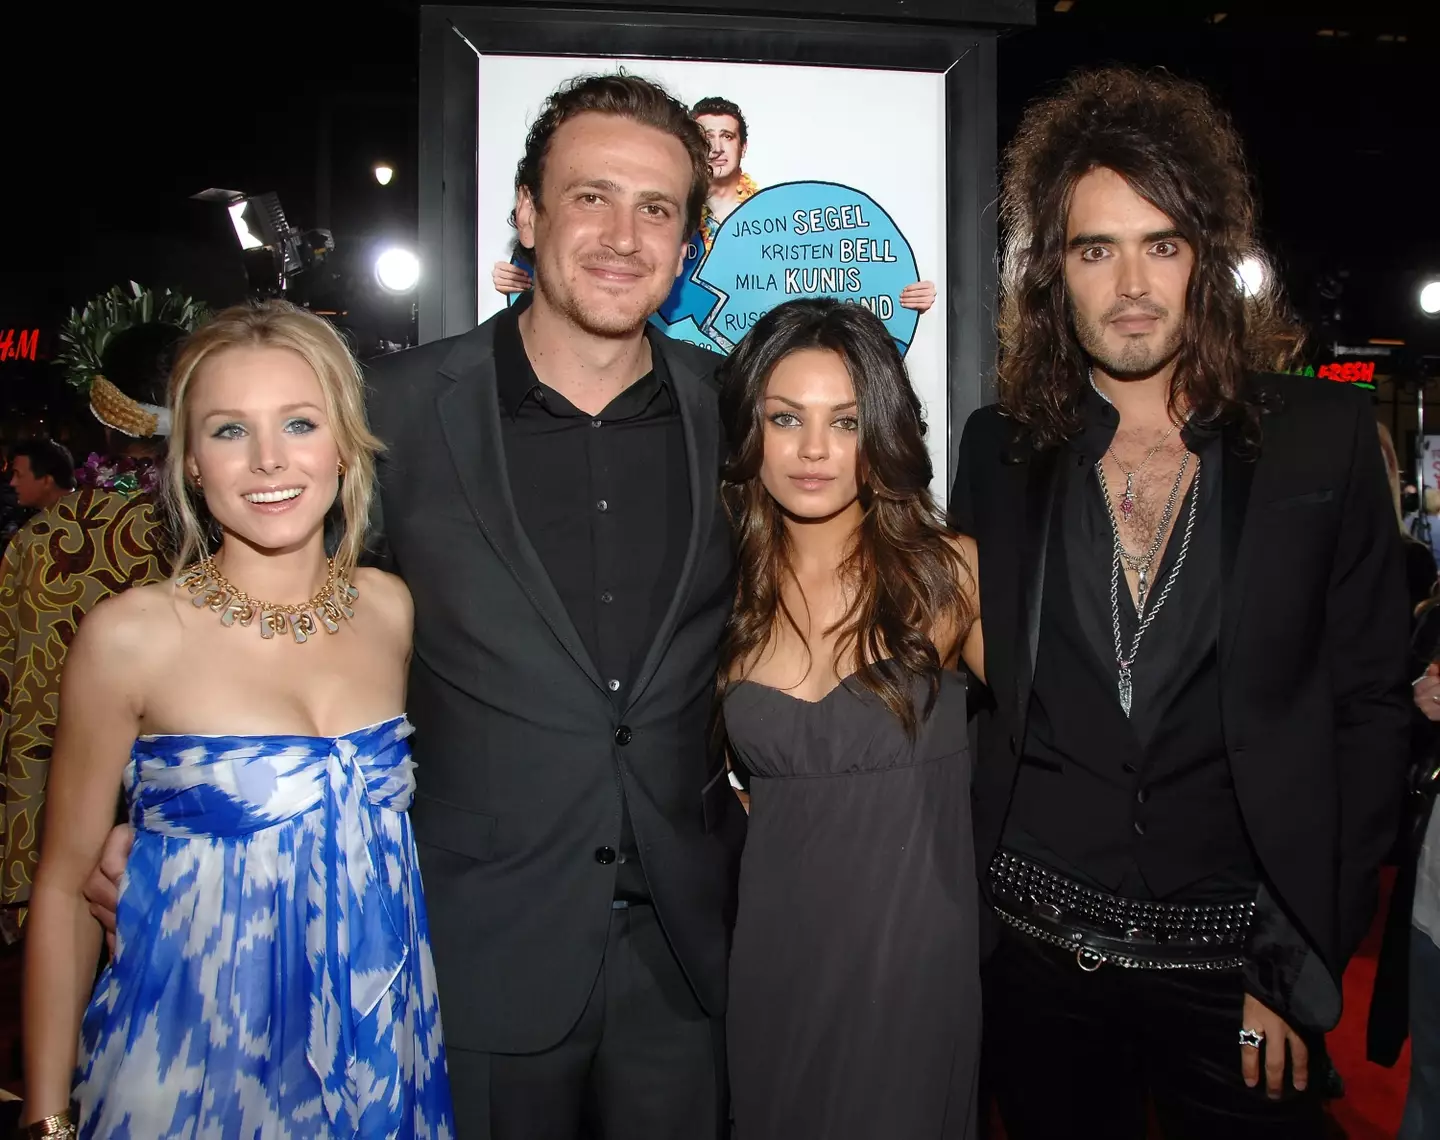 Kristen Bell starred alongside Russell Brand in 2008 movie Forgetting Sarah Marshall.